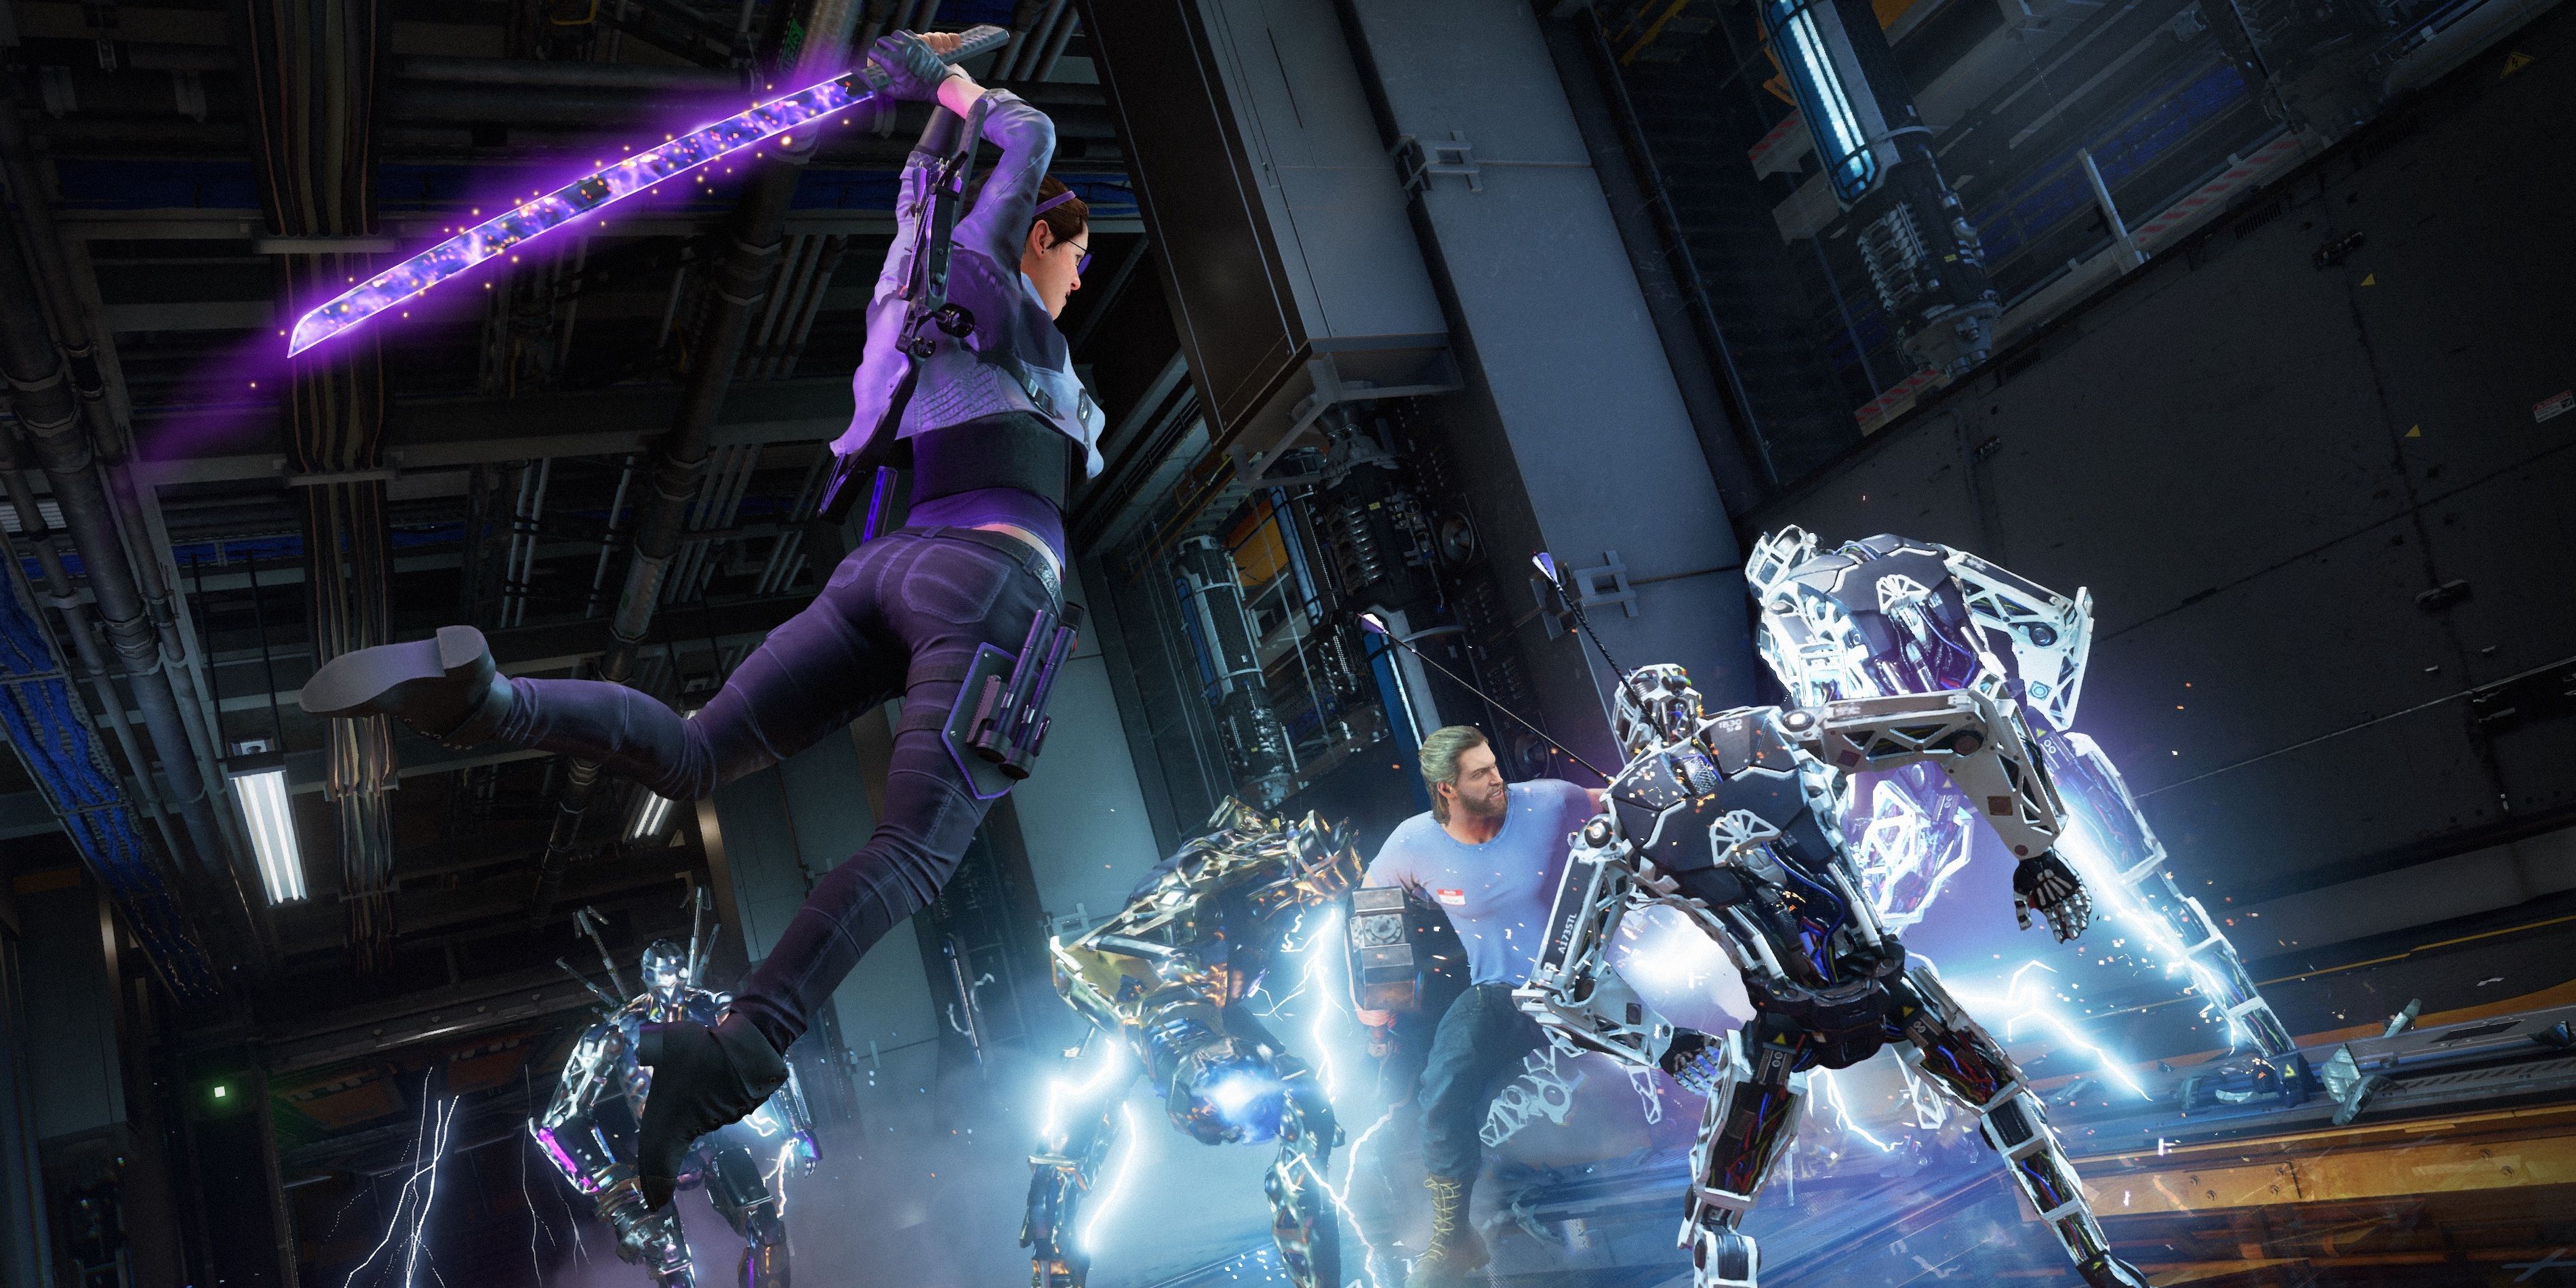 Kate Bishop in action in Marvel's Avengers video game